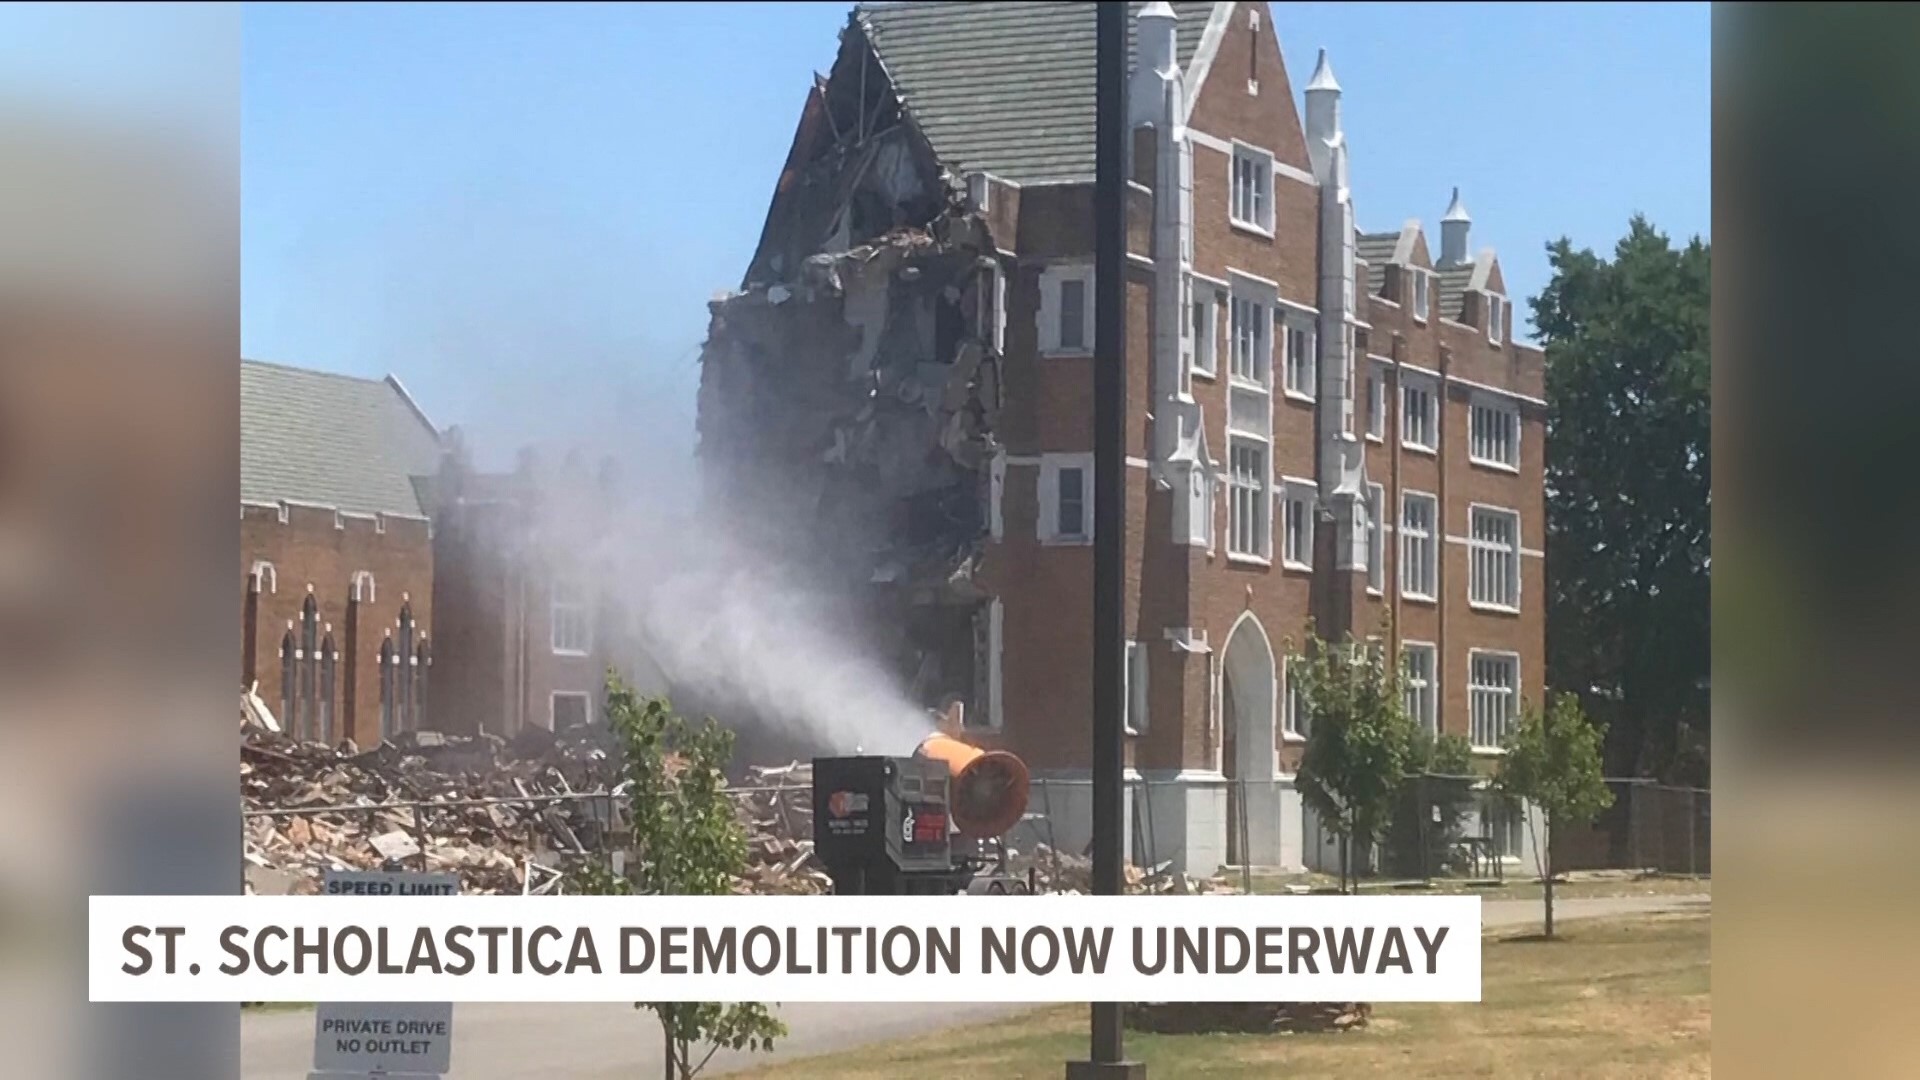 Daily news headlines for July 12, 2022: St. Scholastica demolition underway, protest at Lamar School Board meeting, Pope County casino update.